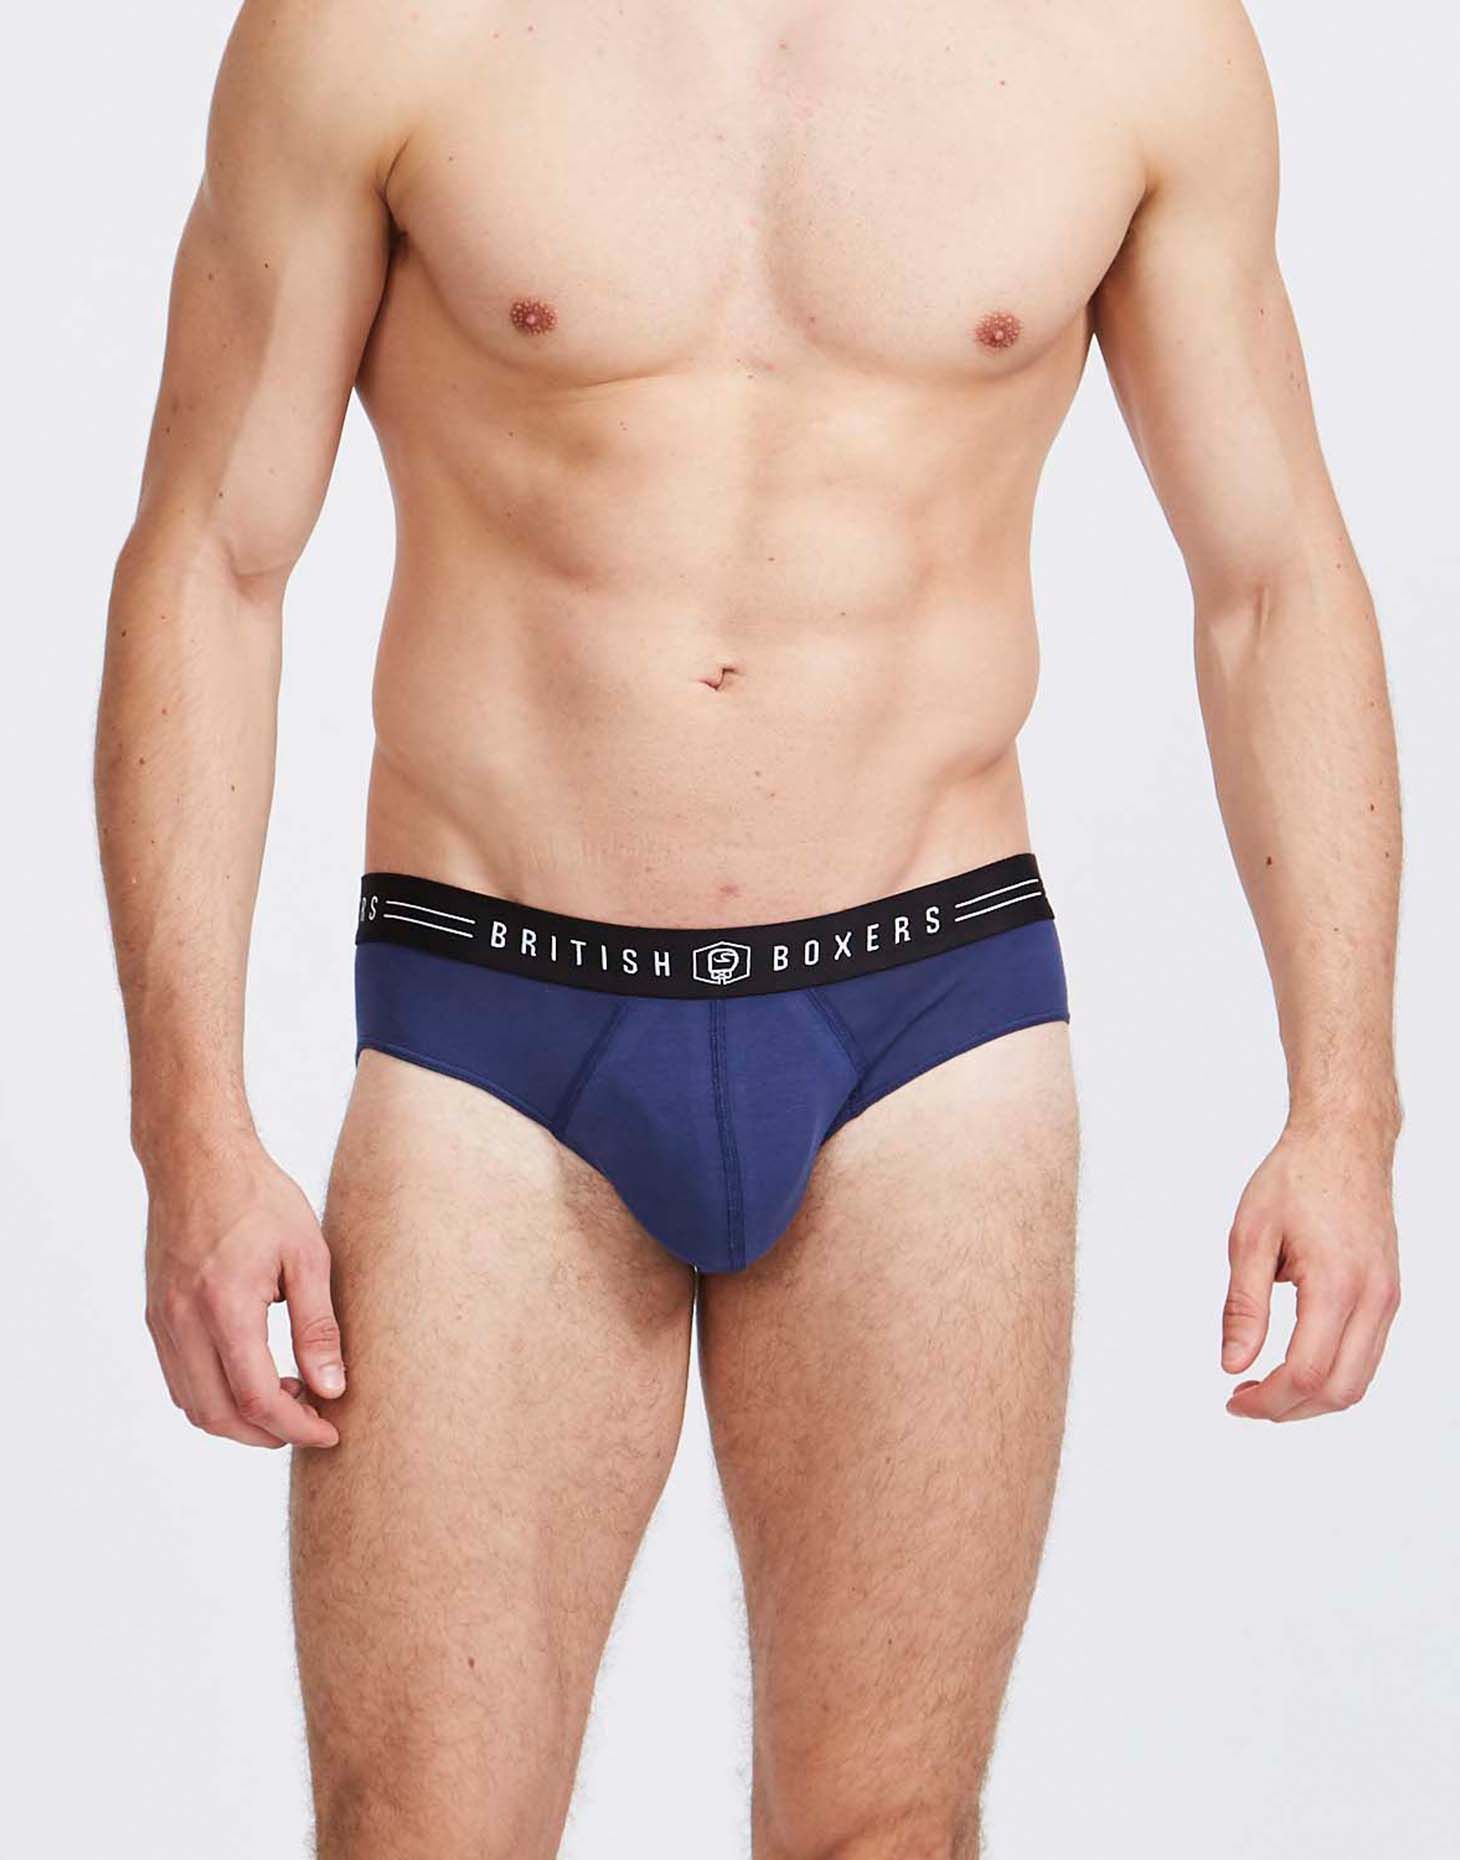 Our fitted men’s briefs are made from a wonderfully soft and stretchy blend of 95% premium 180gsm cotton and 5% elastane, which is hugely supportive right where you need it. They’re finished with a comfortable embroidered waistband featuring the British Boxers logo, and flat seams for an amazing feel against your skin. All our colours stay true wash after wash, never fading.  Choose your size and receive 4 pairs of men's briefs. You'll receive a random selection of plain colours, but rest assured they're all made from the same 180gsm, flat-seamed jersey we always use, all beautifully cut, and no garish patterns or horrendous colours will be included.  Available in sizes S - XXL.  95% cotton, 5% elastane.